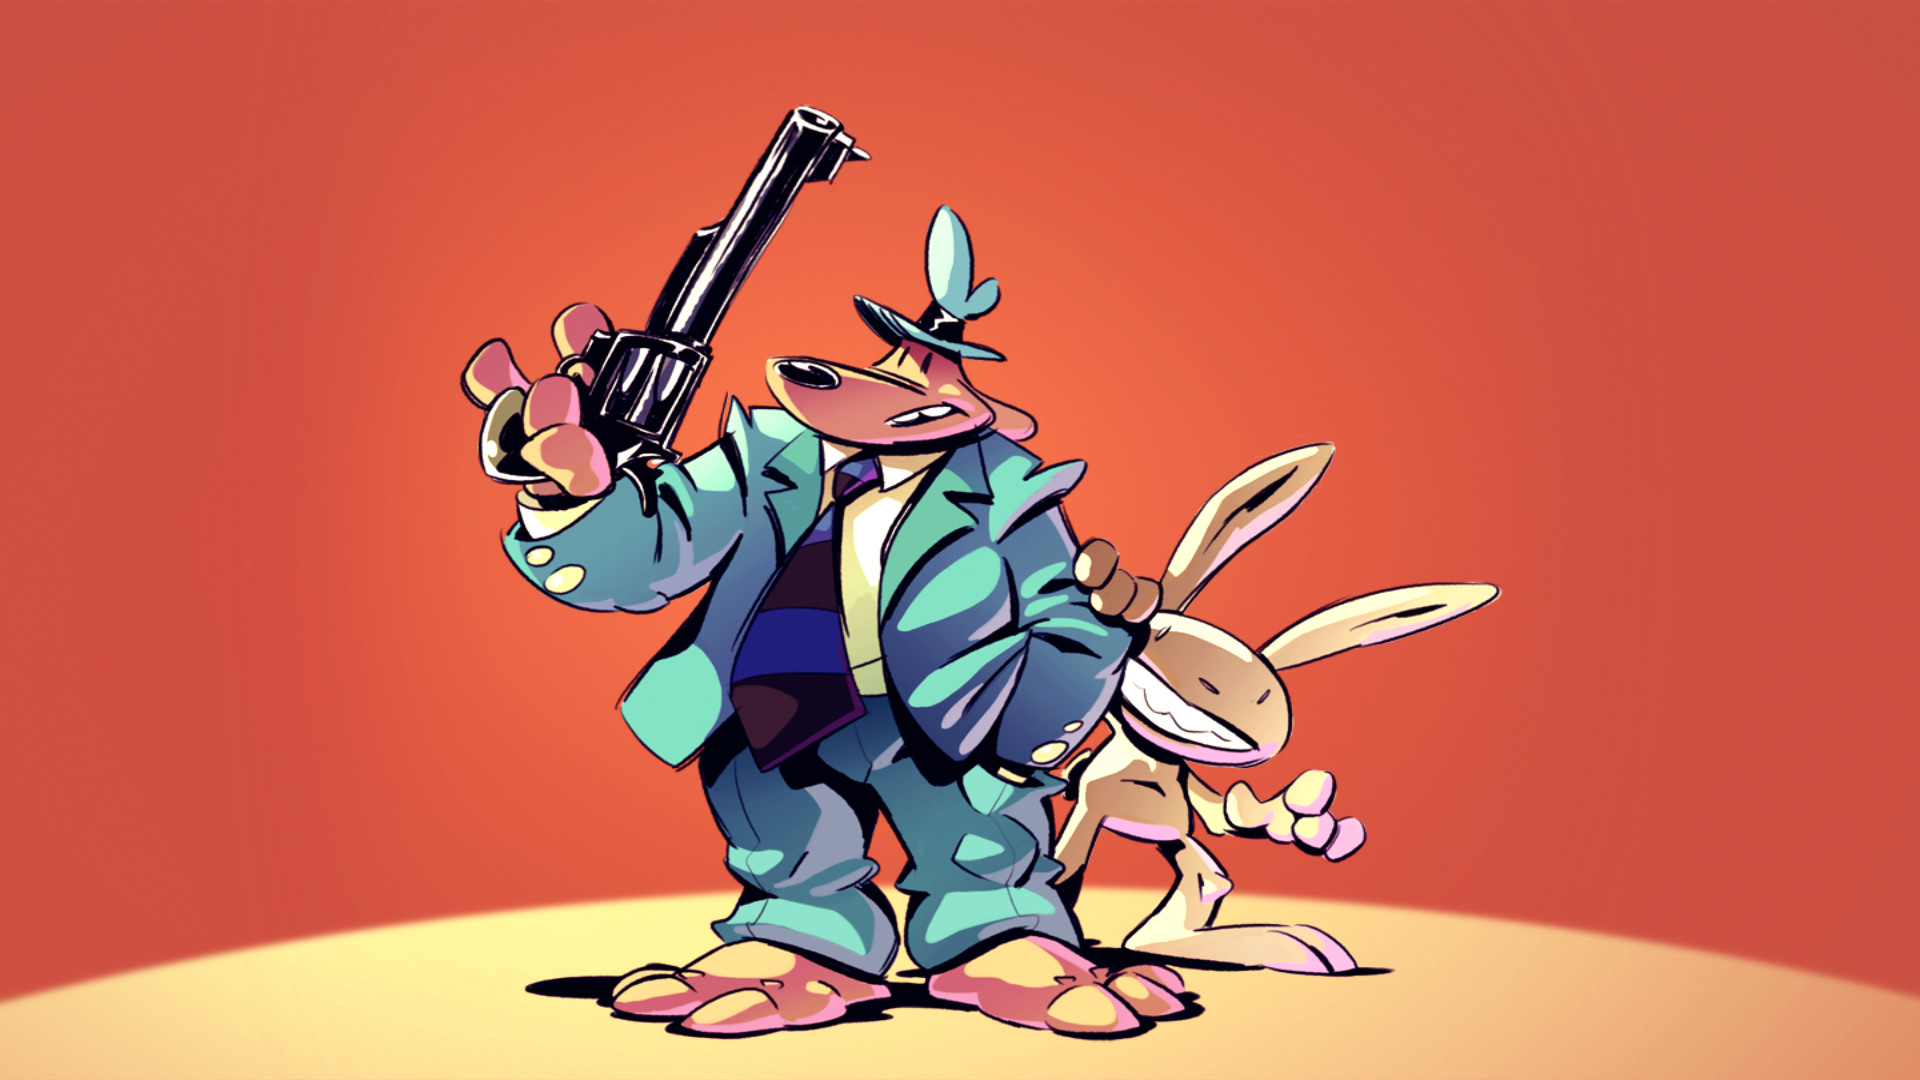 Sam & Max 204: Chariots of the Dogs